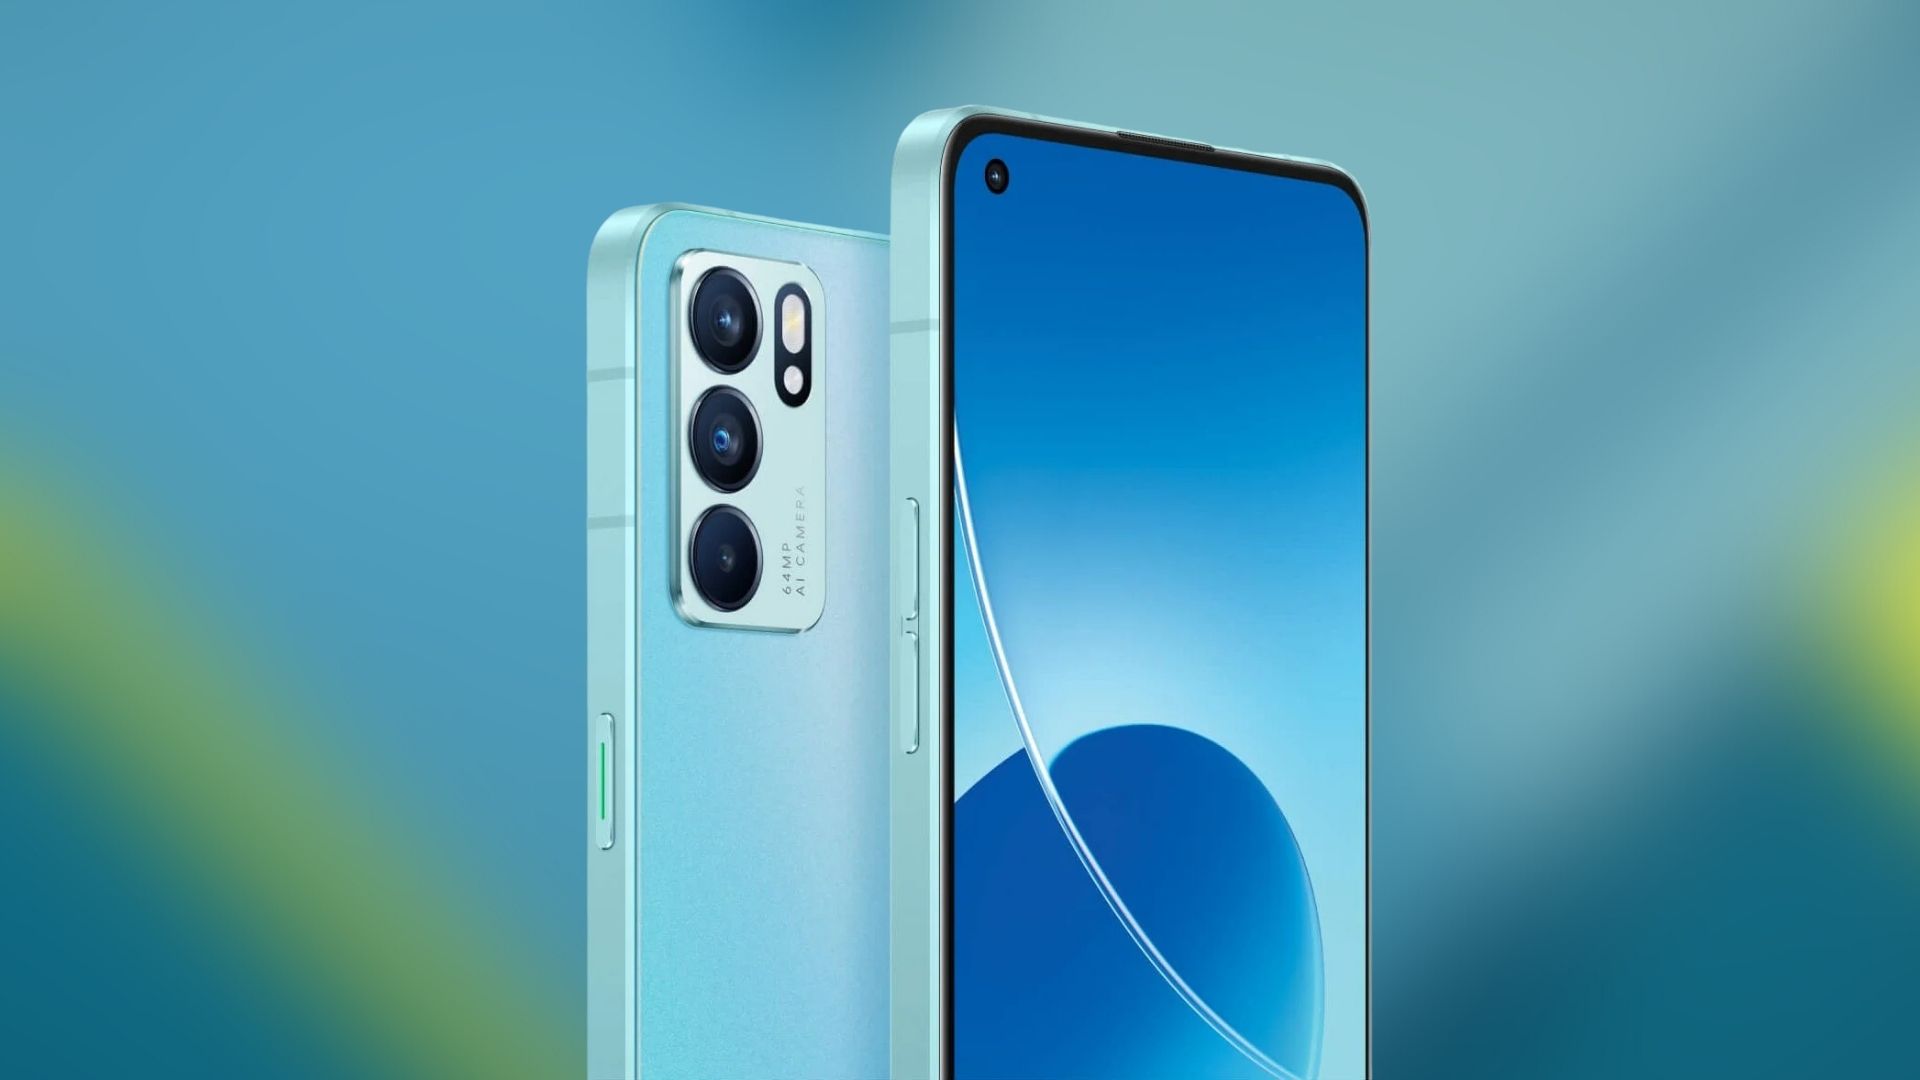 Oppo Reno 7 may be rebranded as Oppo Find X5 Lite in the European